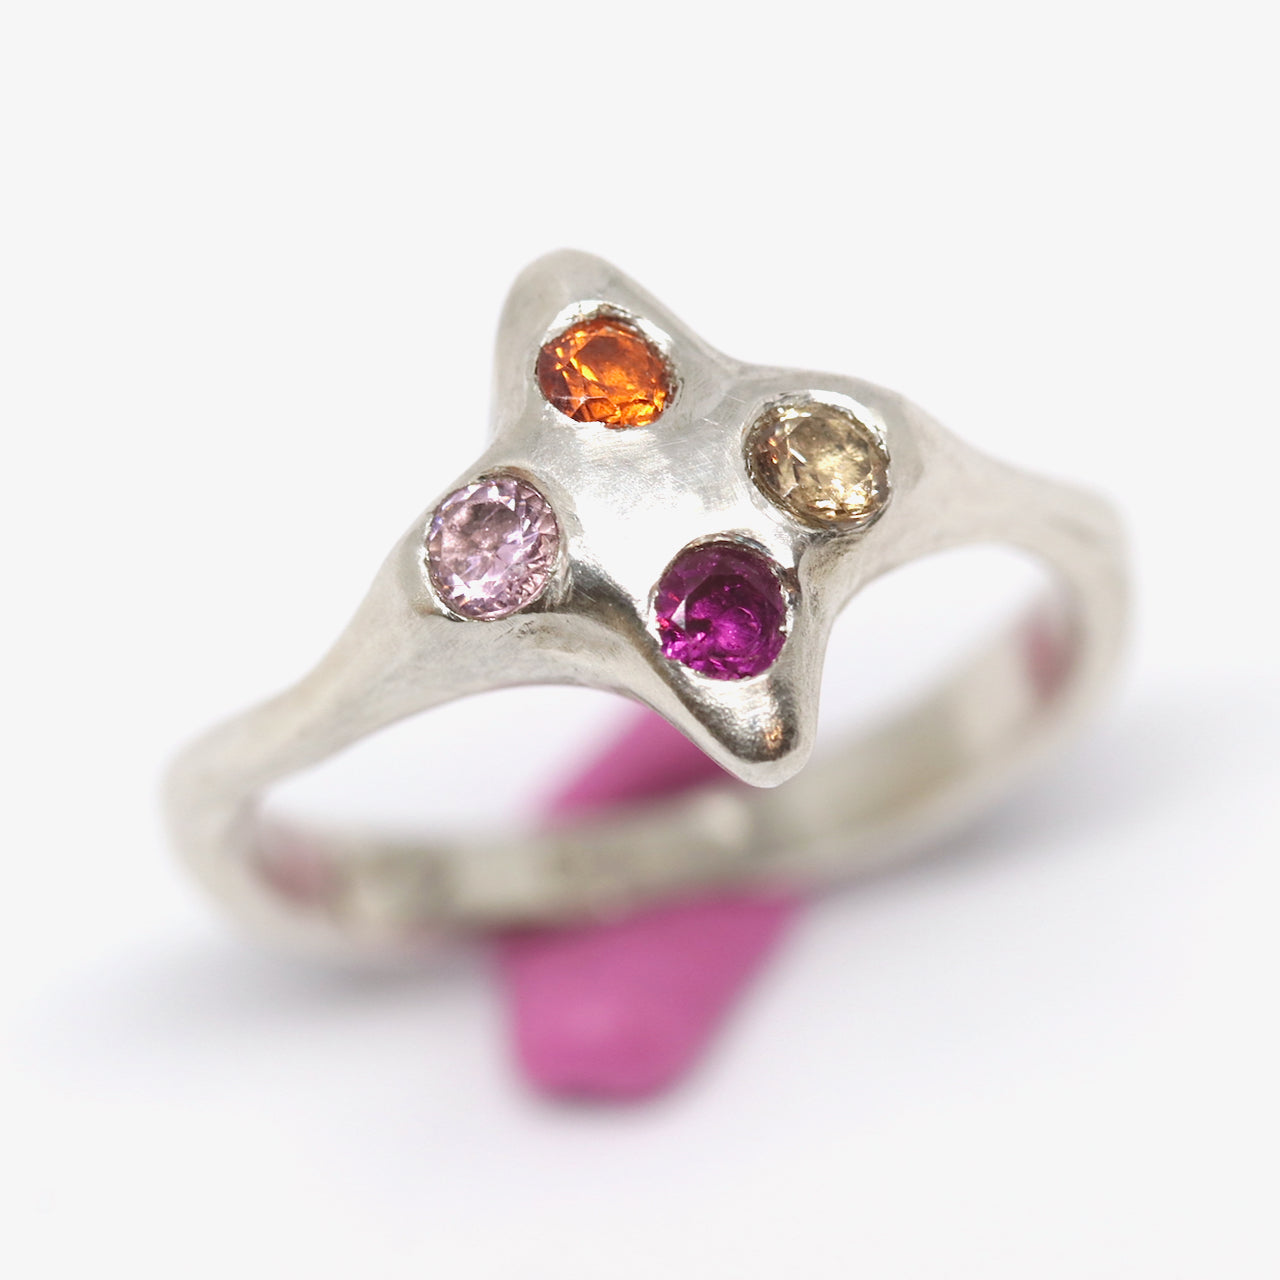 A silver ring with colourful gems. This ring was hand made in Wānaka, New Zealand by designer and jeweller Briar Hardy-Hesson.